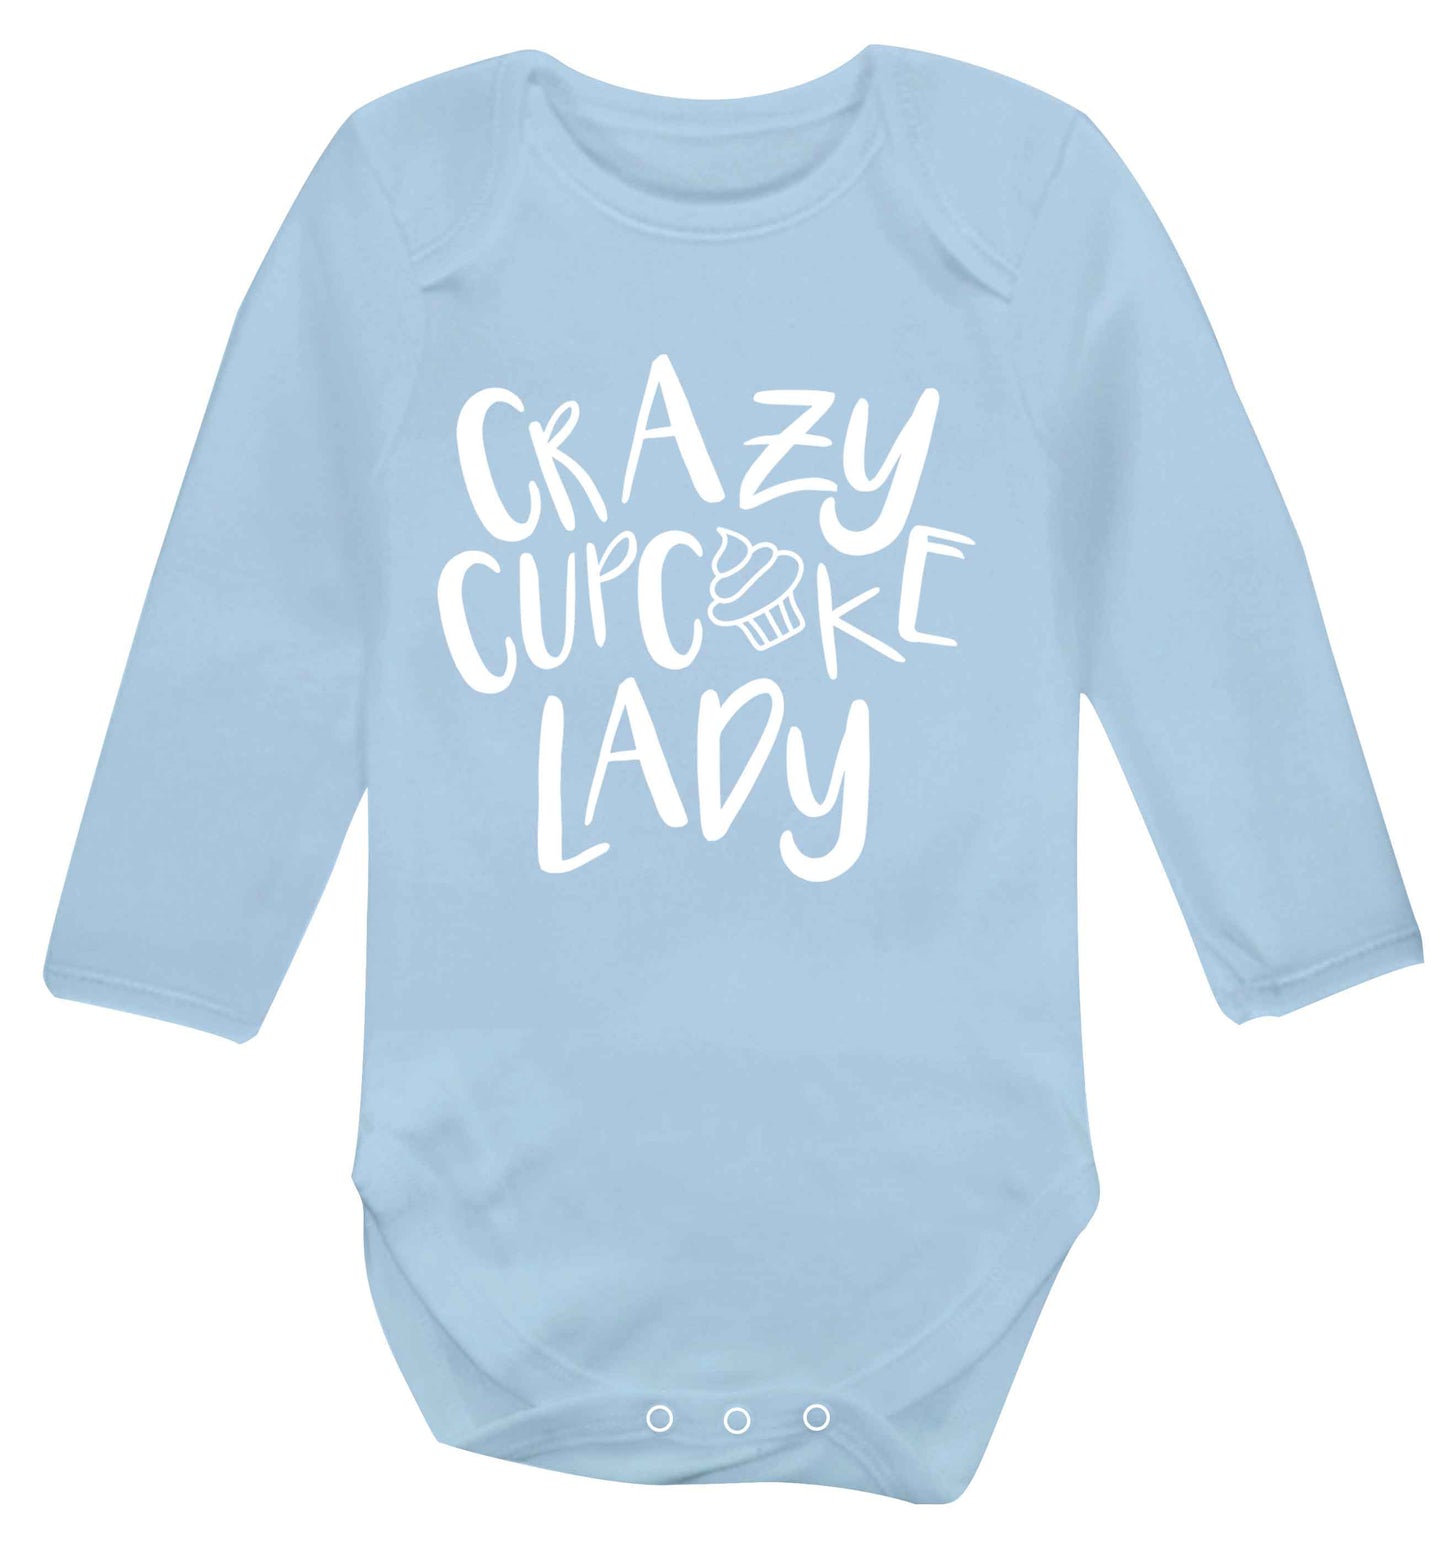 Crazy cupcake lady Baby Vest long sleeved pale blue 6-12 months